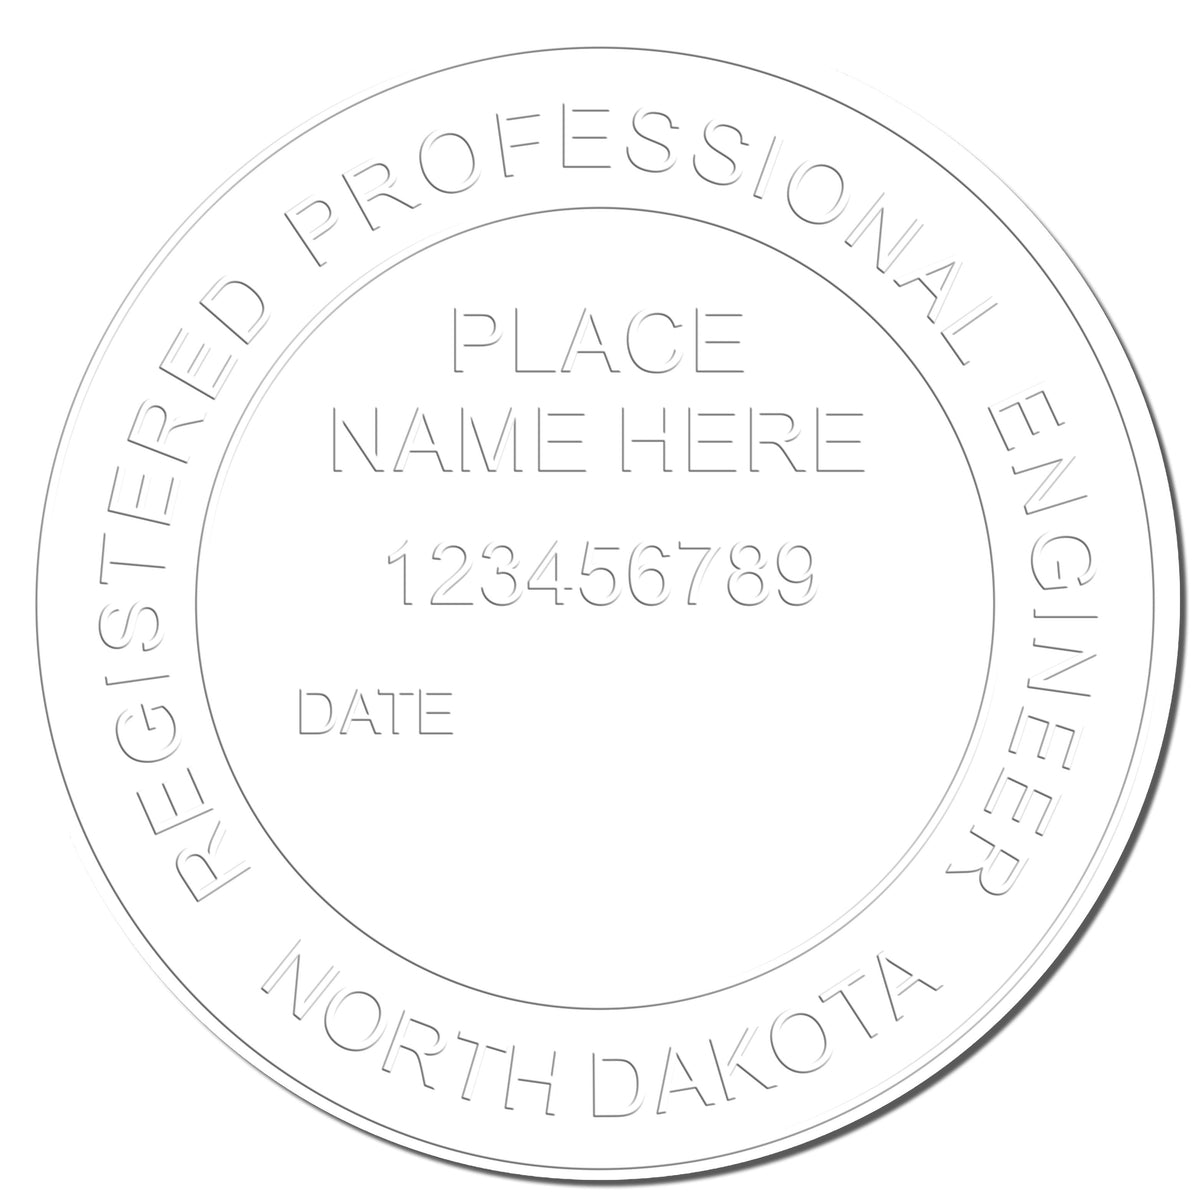 Another Example of a stamped impression of the North Dakota Engineer Desk Seal on a piece of office paper.